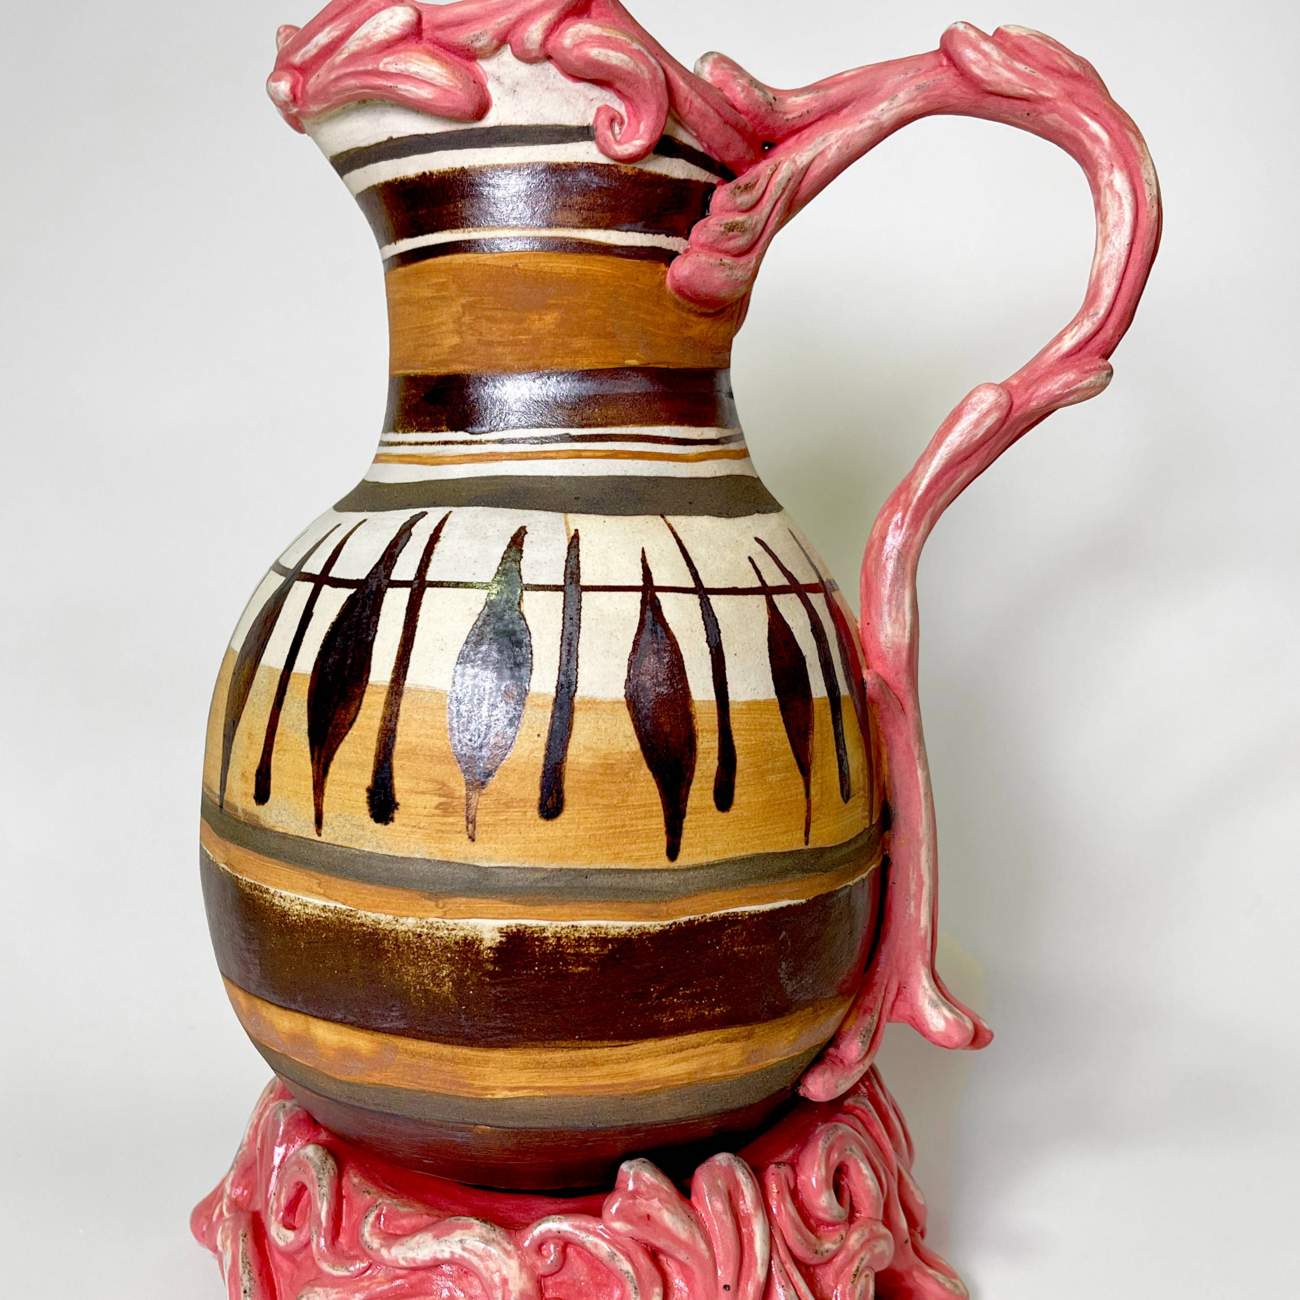 Student work: thrown pottery piece with biomorphic flowing forms for the handle, lip and base